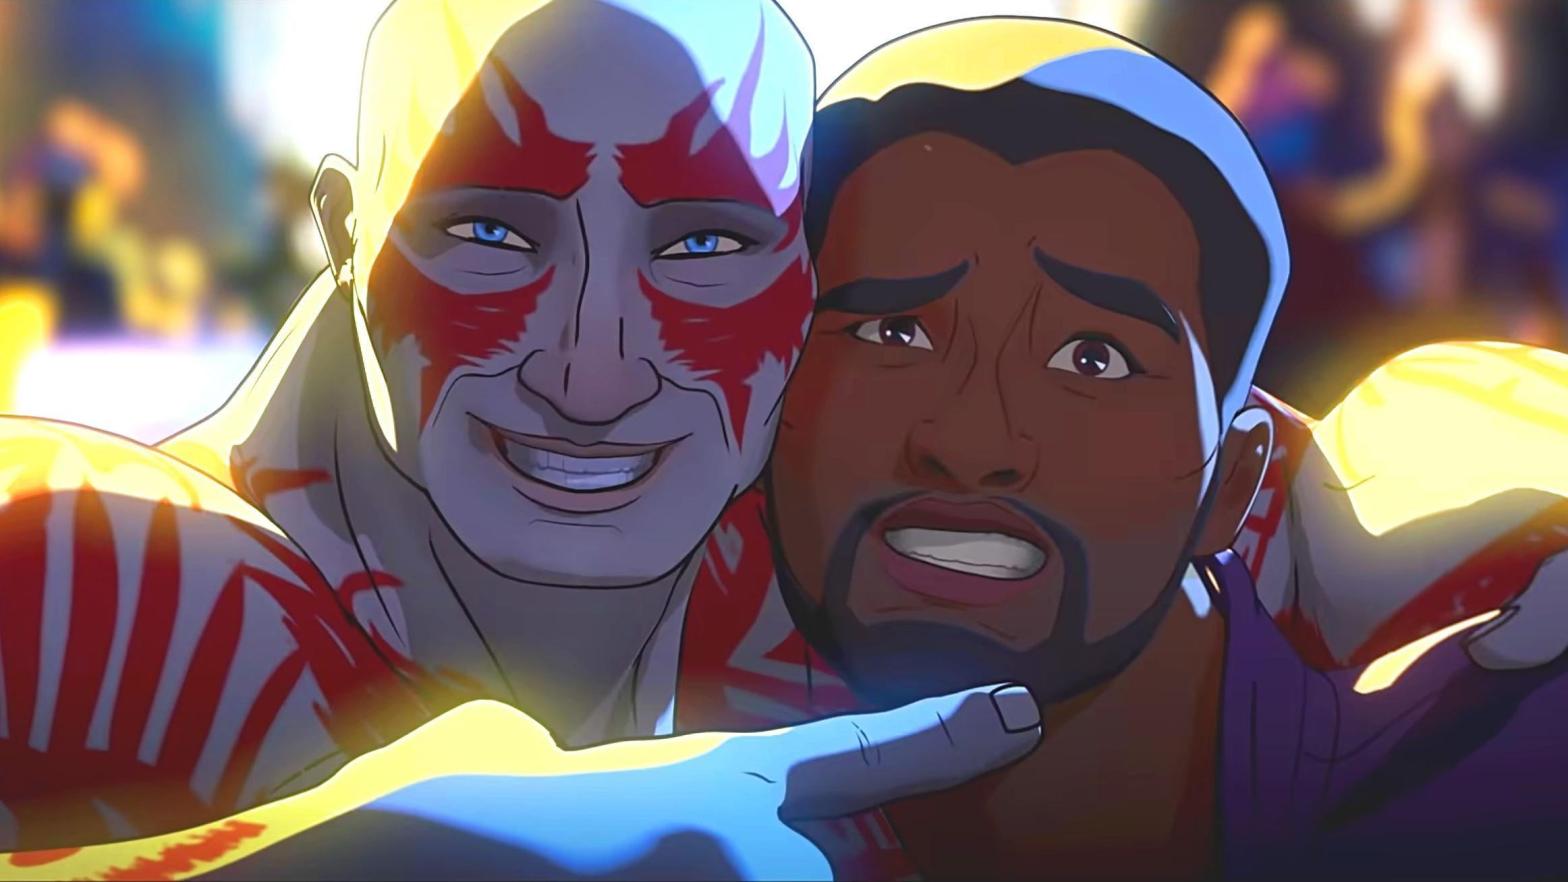 A quieter What If? moment with Drax and T'Challa the Star-Lord. (Image: Disney+)